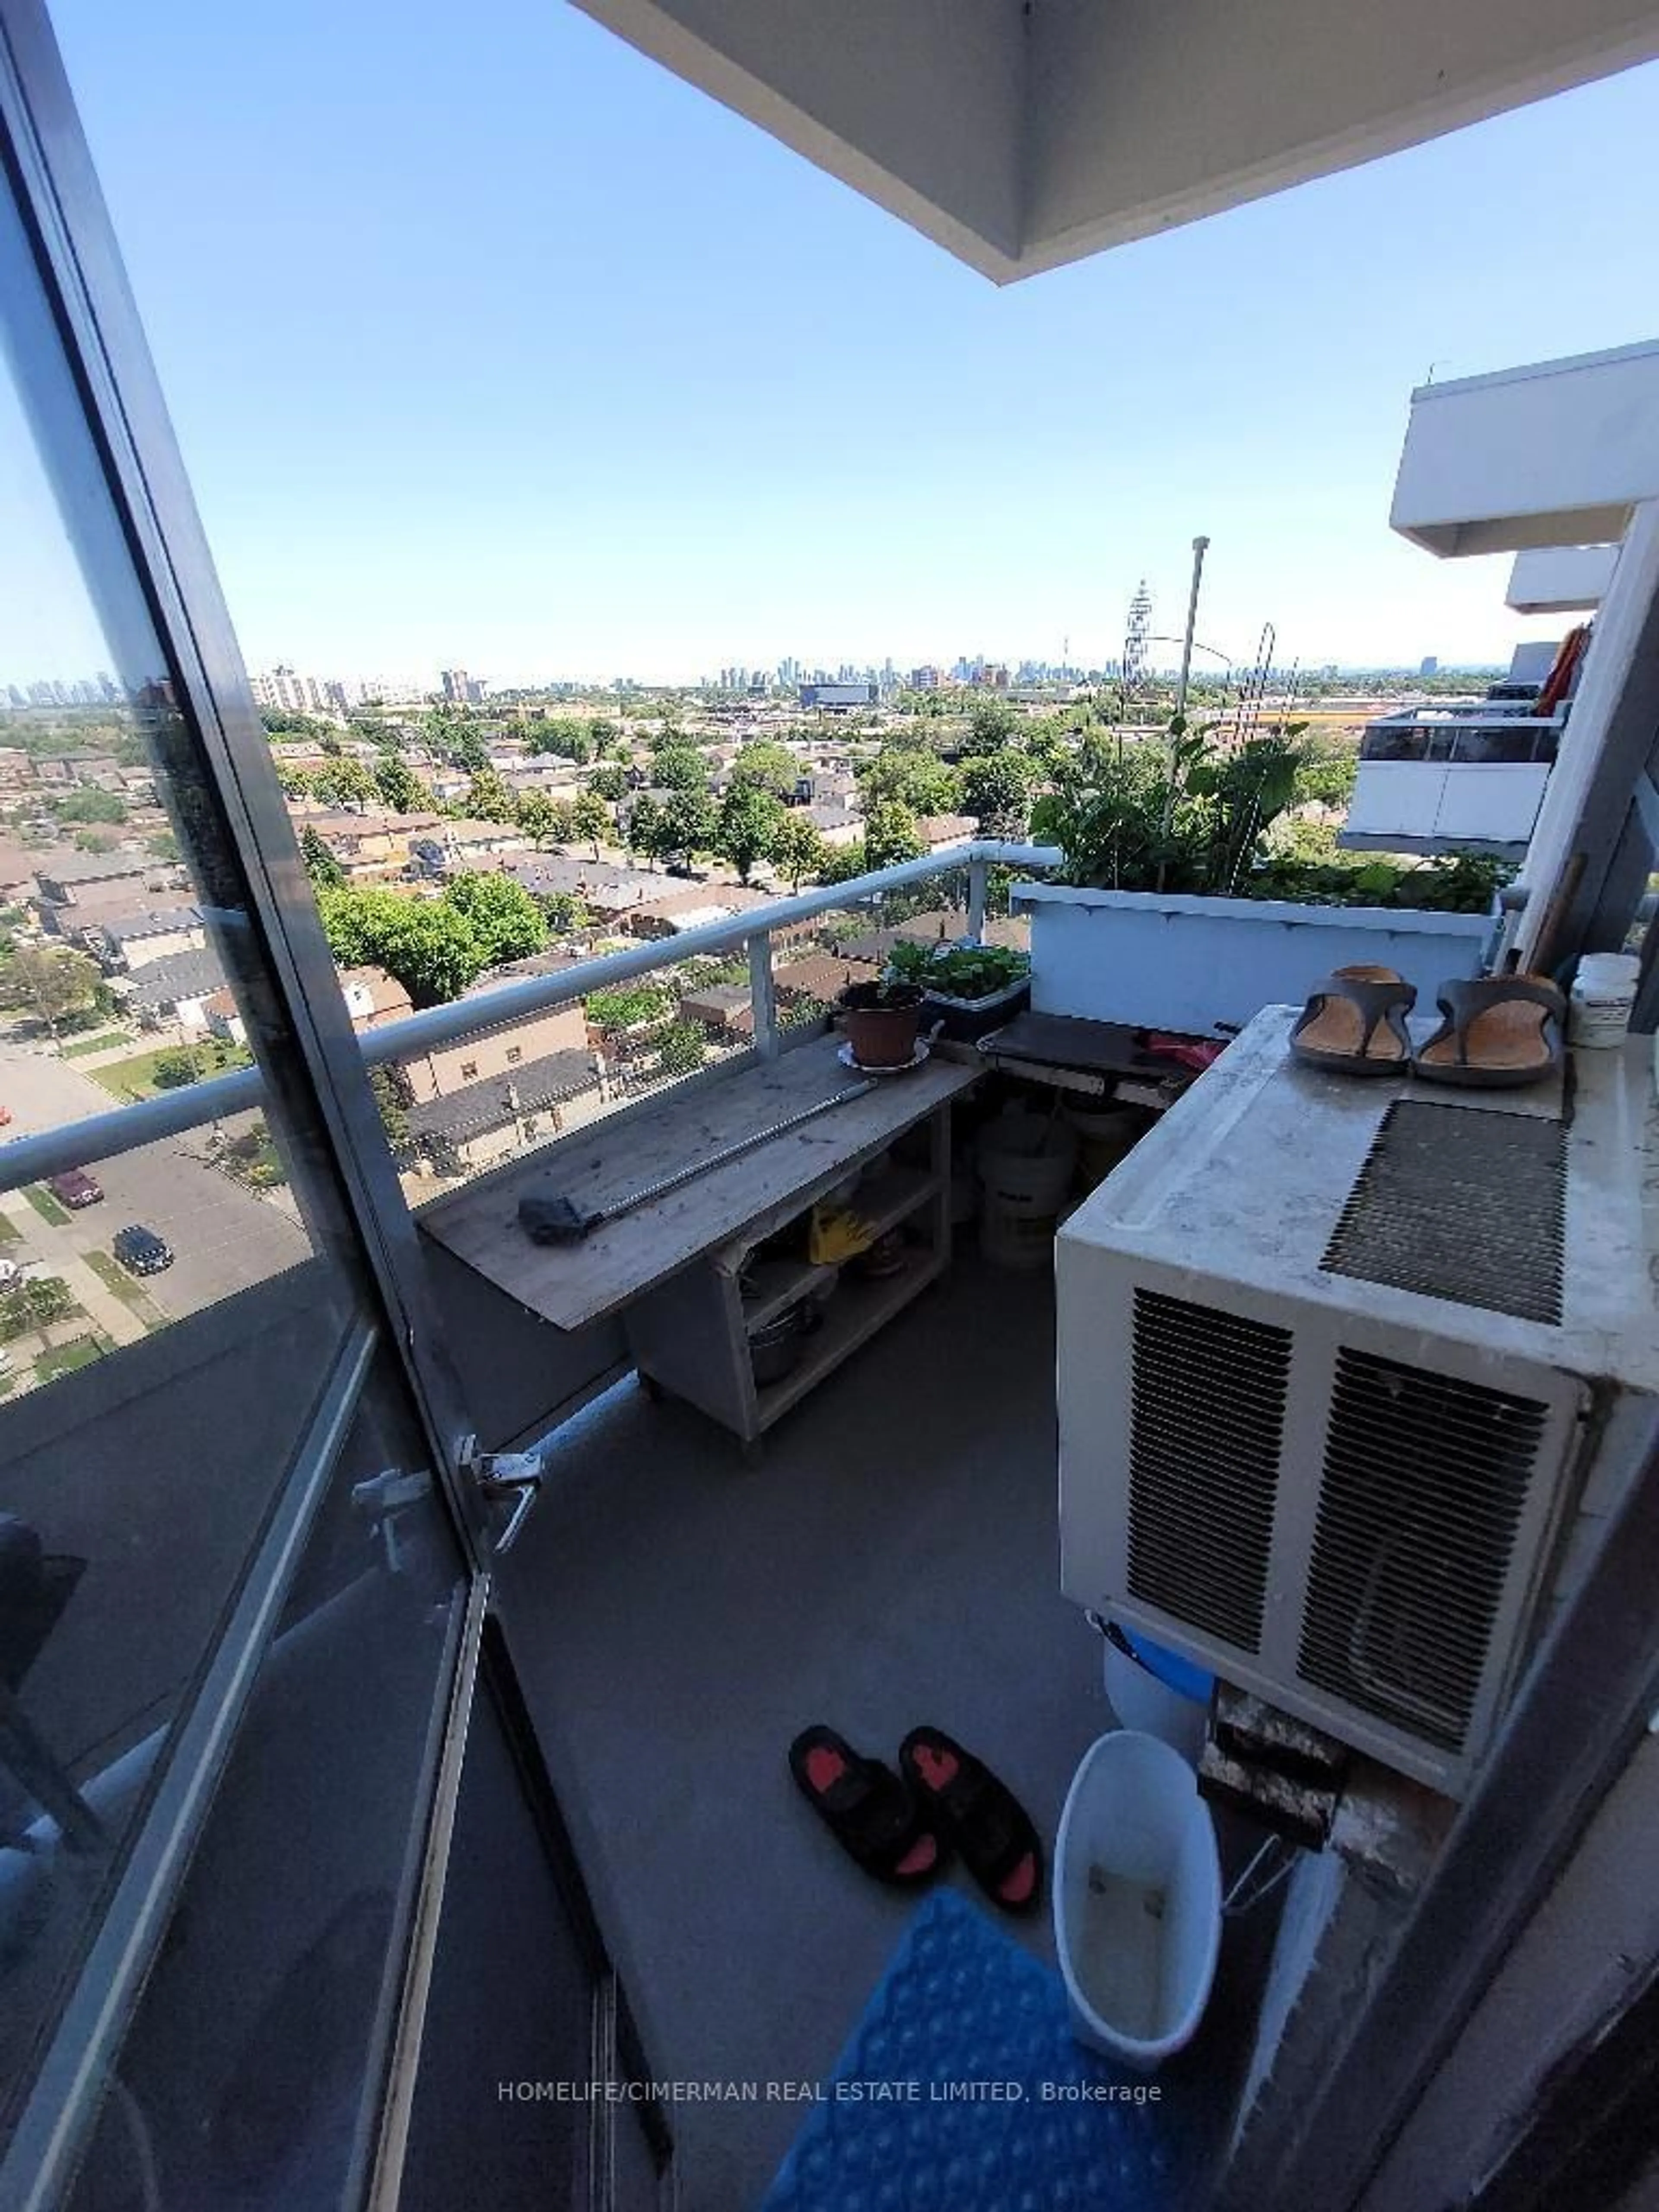 Balcony in the apartment for 940 Caledonia Rd #1207, Toronto Ontario M6B 3Y4